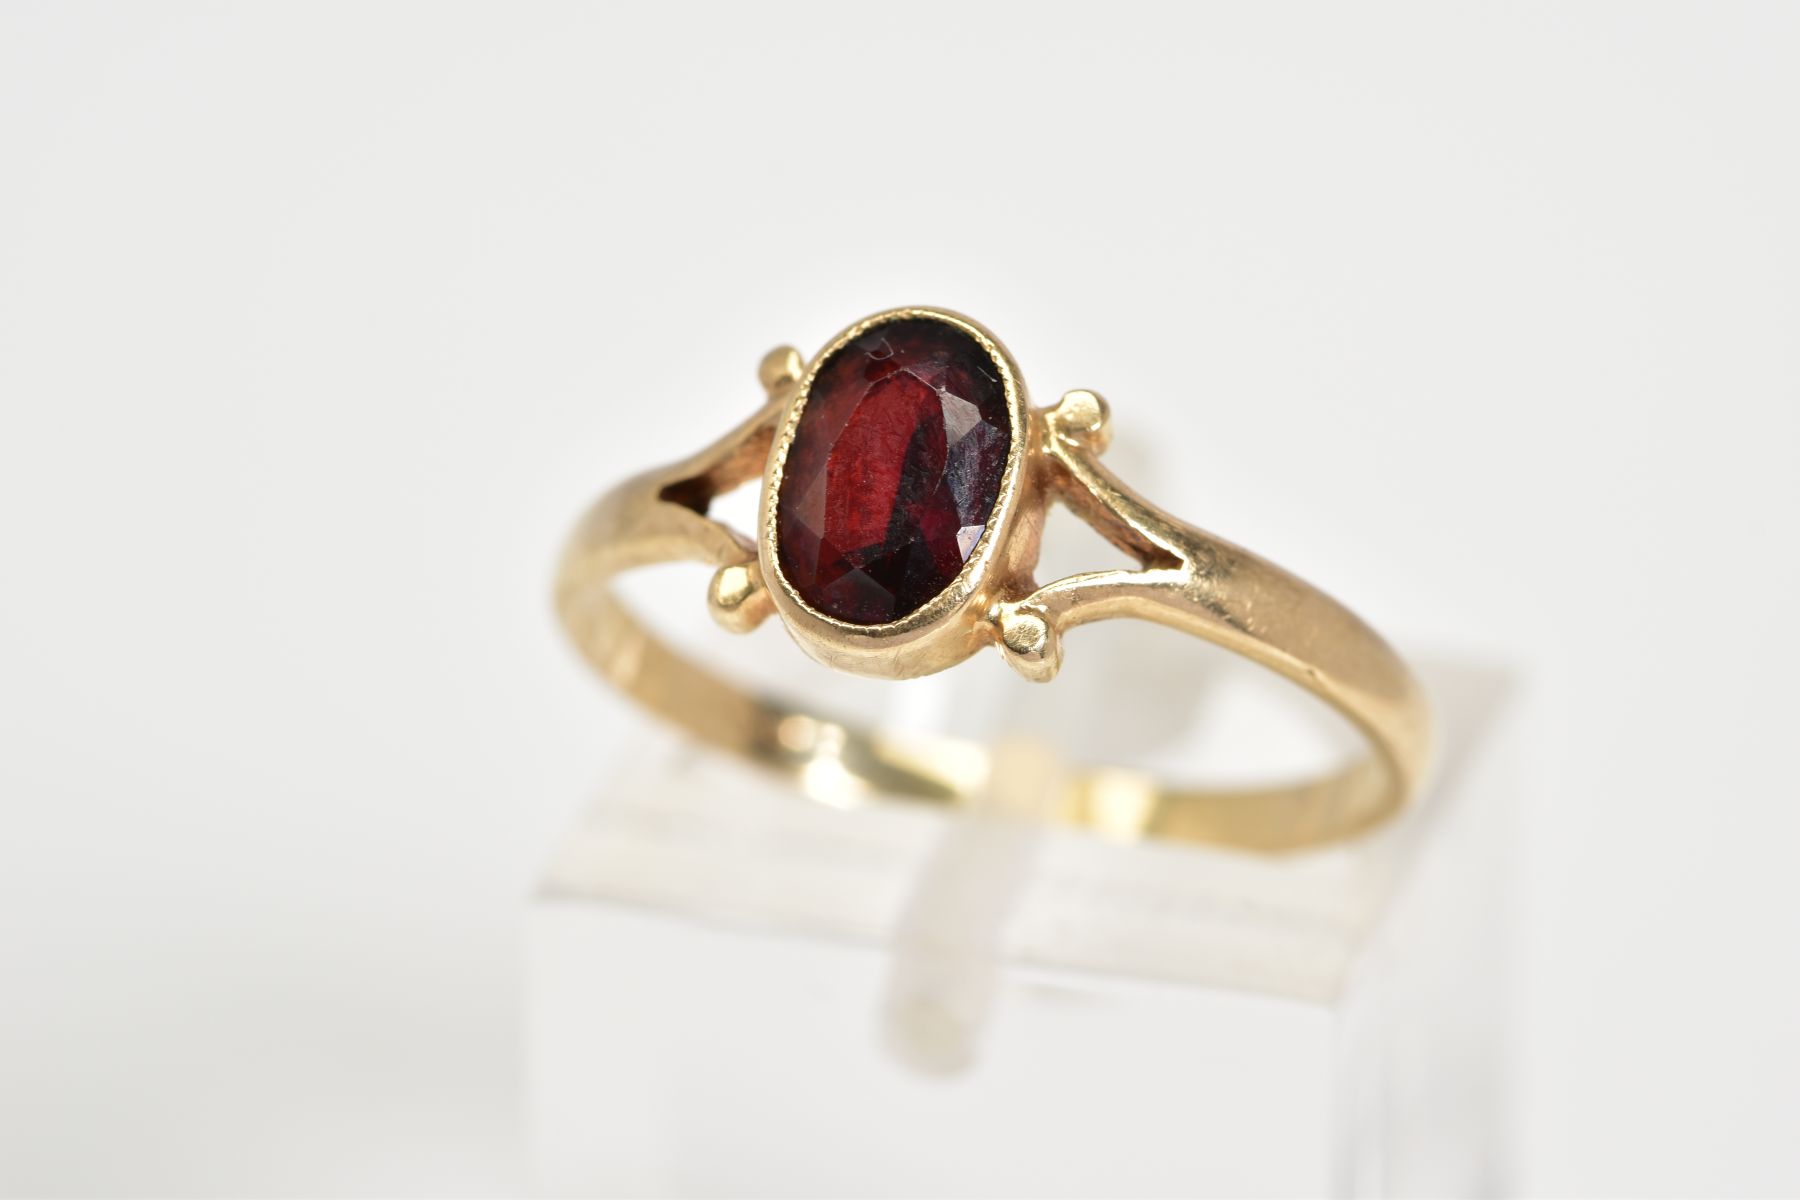 A 9CT GOLD GARNET RING, set with a central oval cut garnet to the bifurcated shoulders and plain